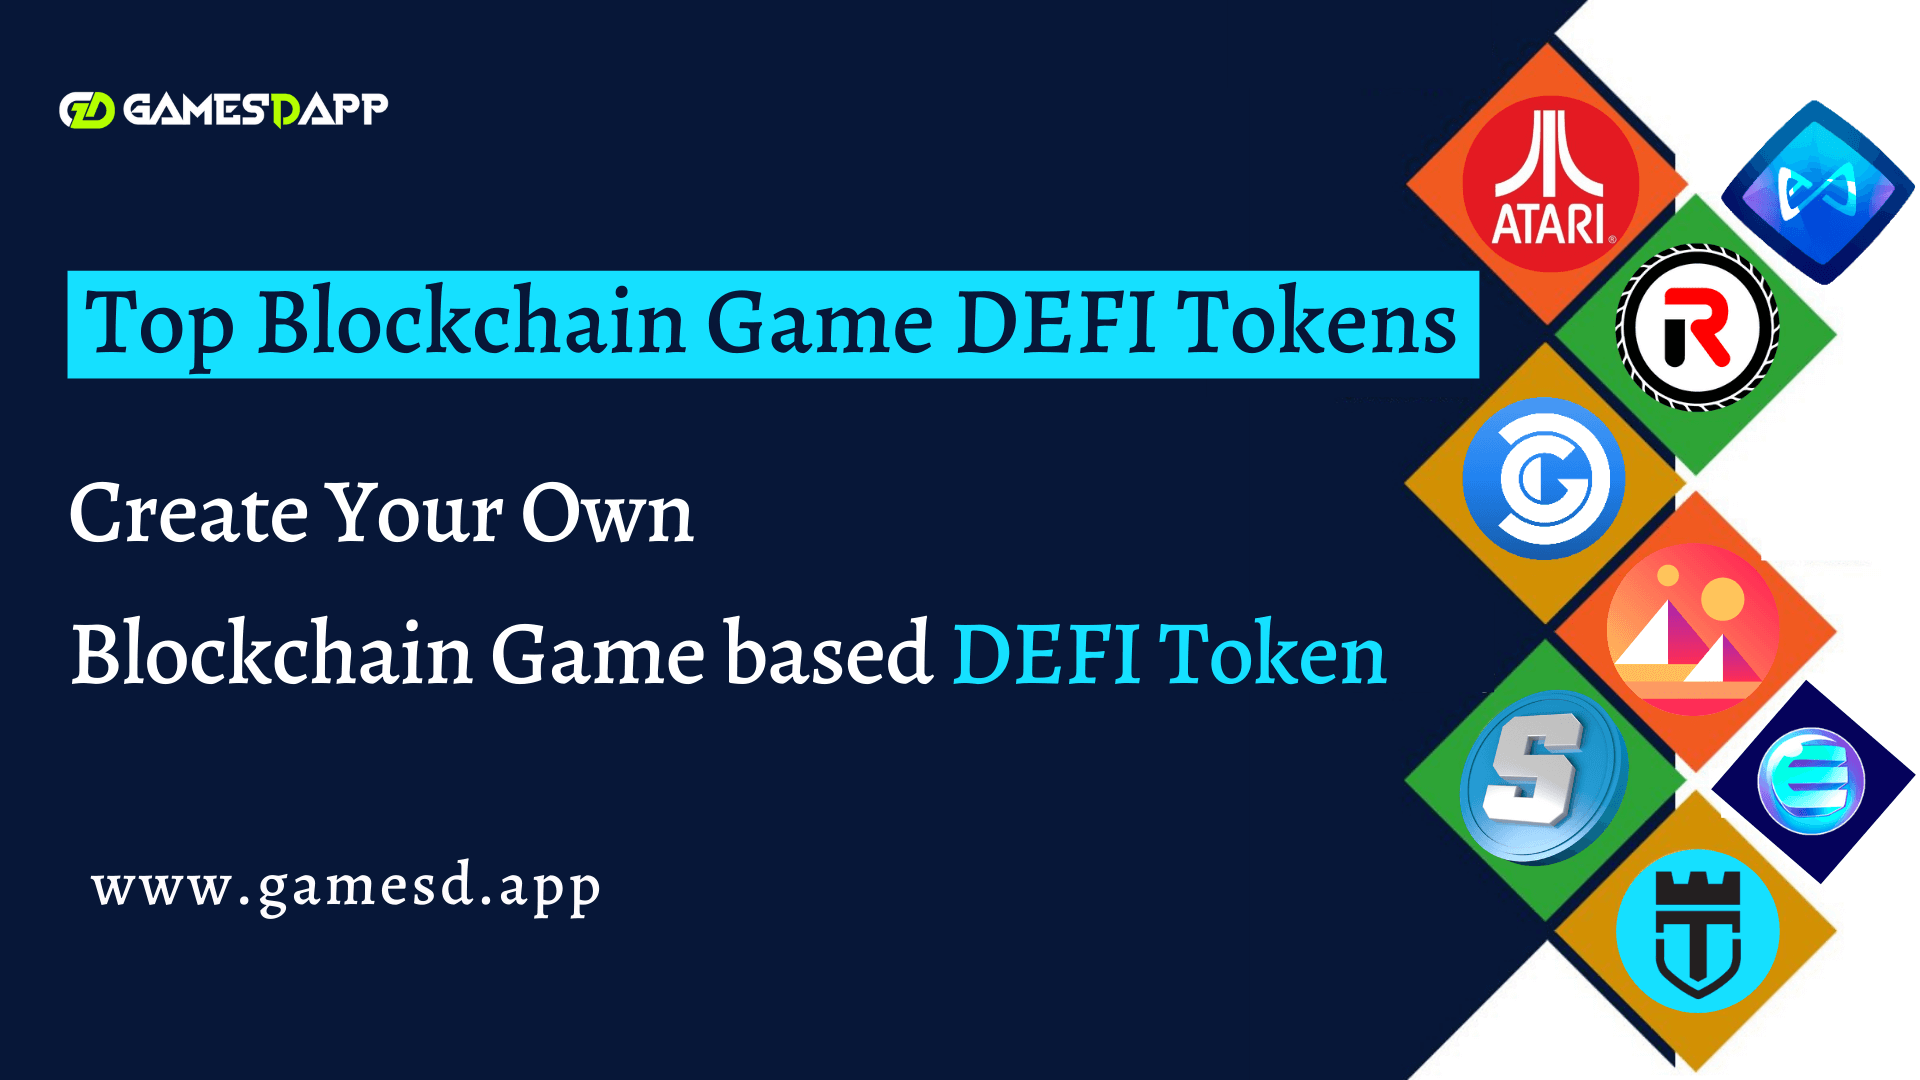 Top Blockchain Game DEFI Tokens - Create Your Own Favorite Blockchain Game based DEFI Token